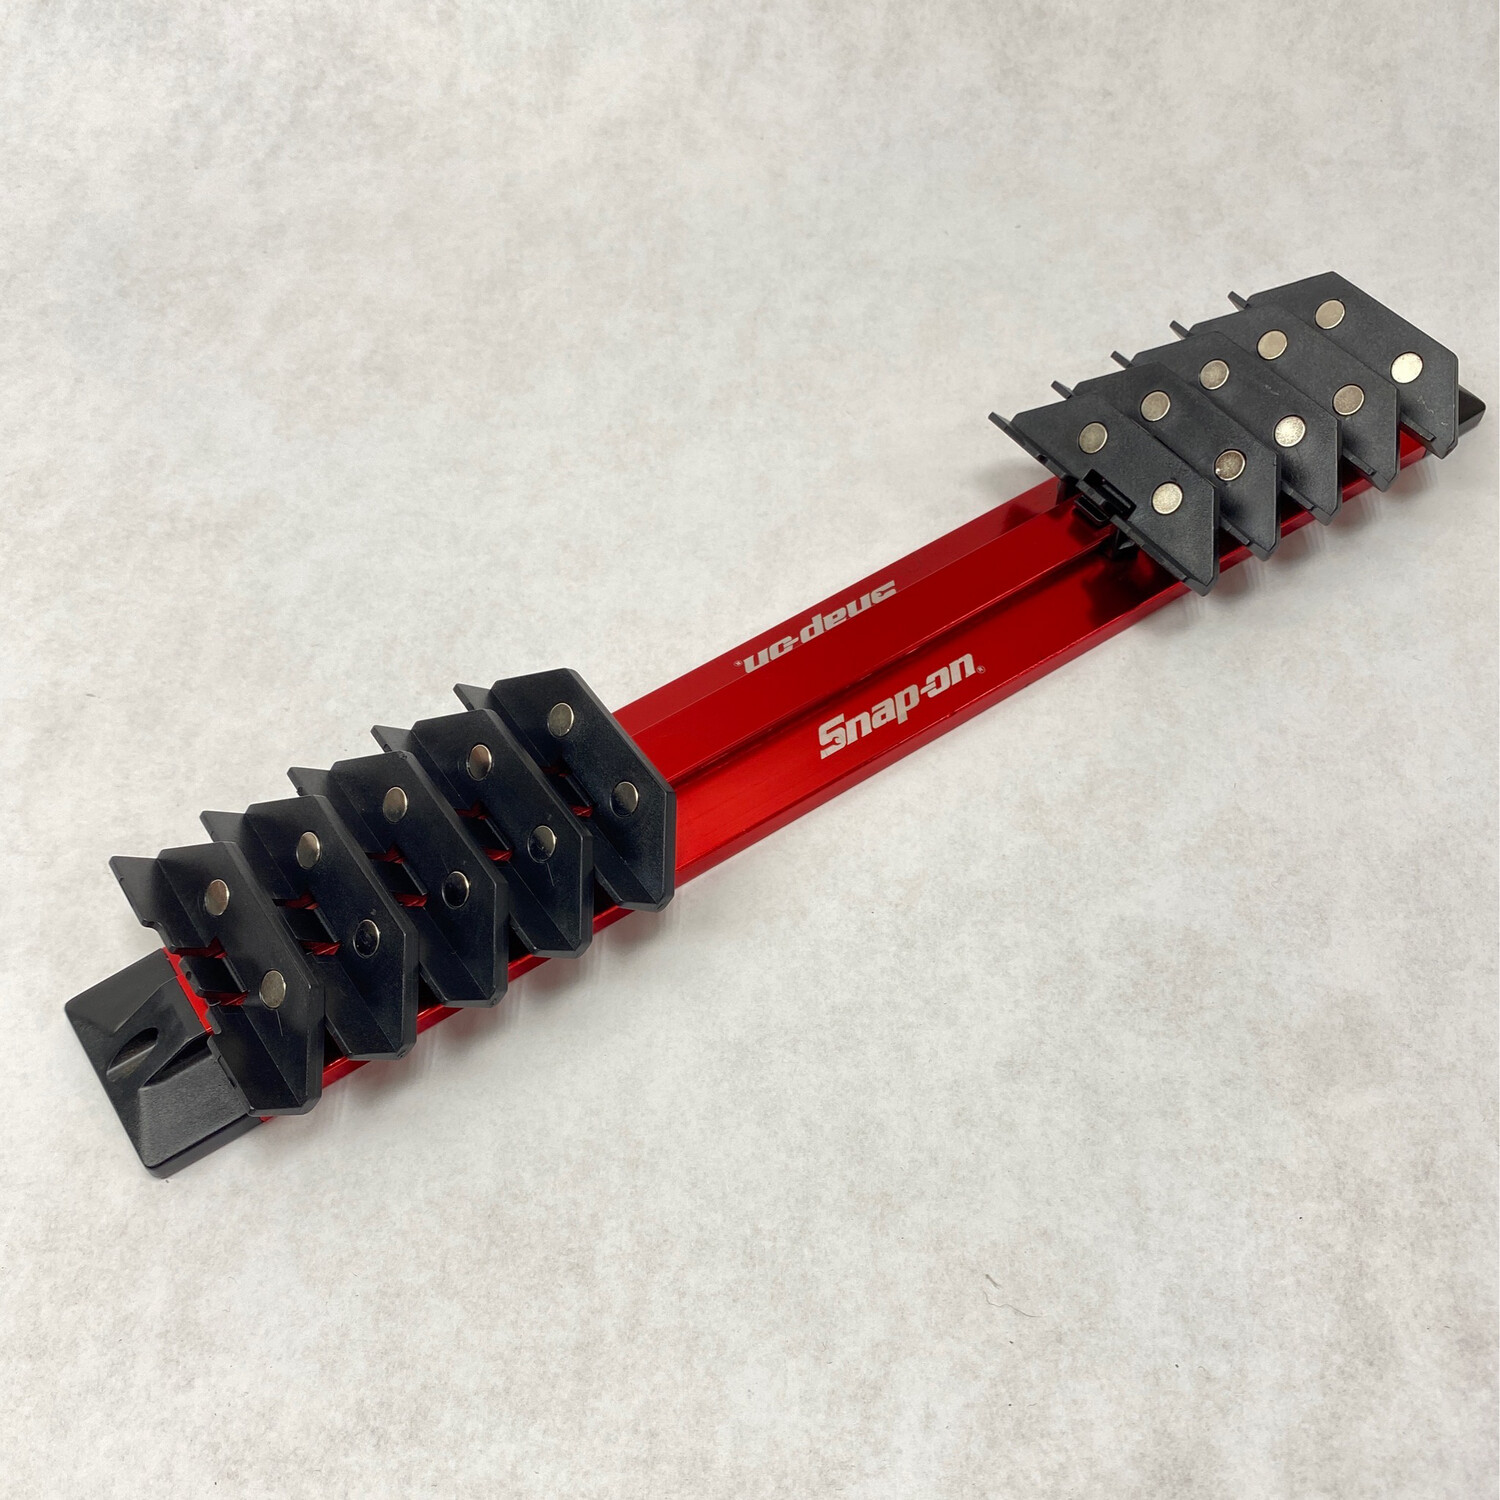 12 Magnetic Wrench Rack (Red), WRRAK12RD